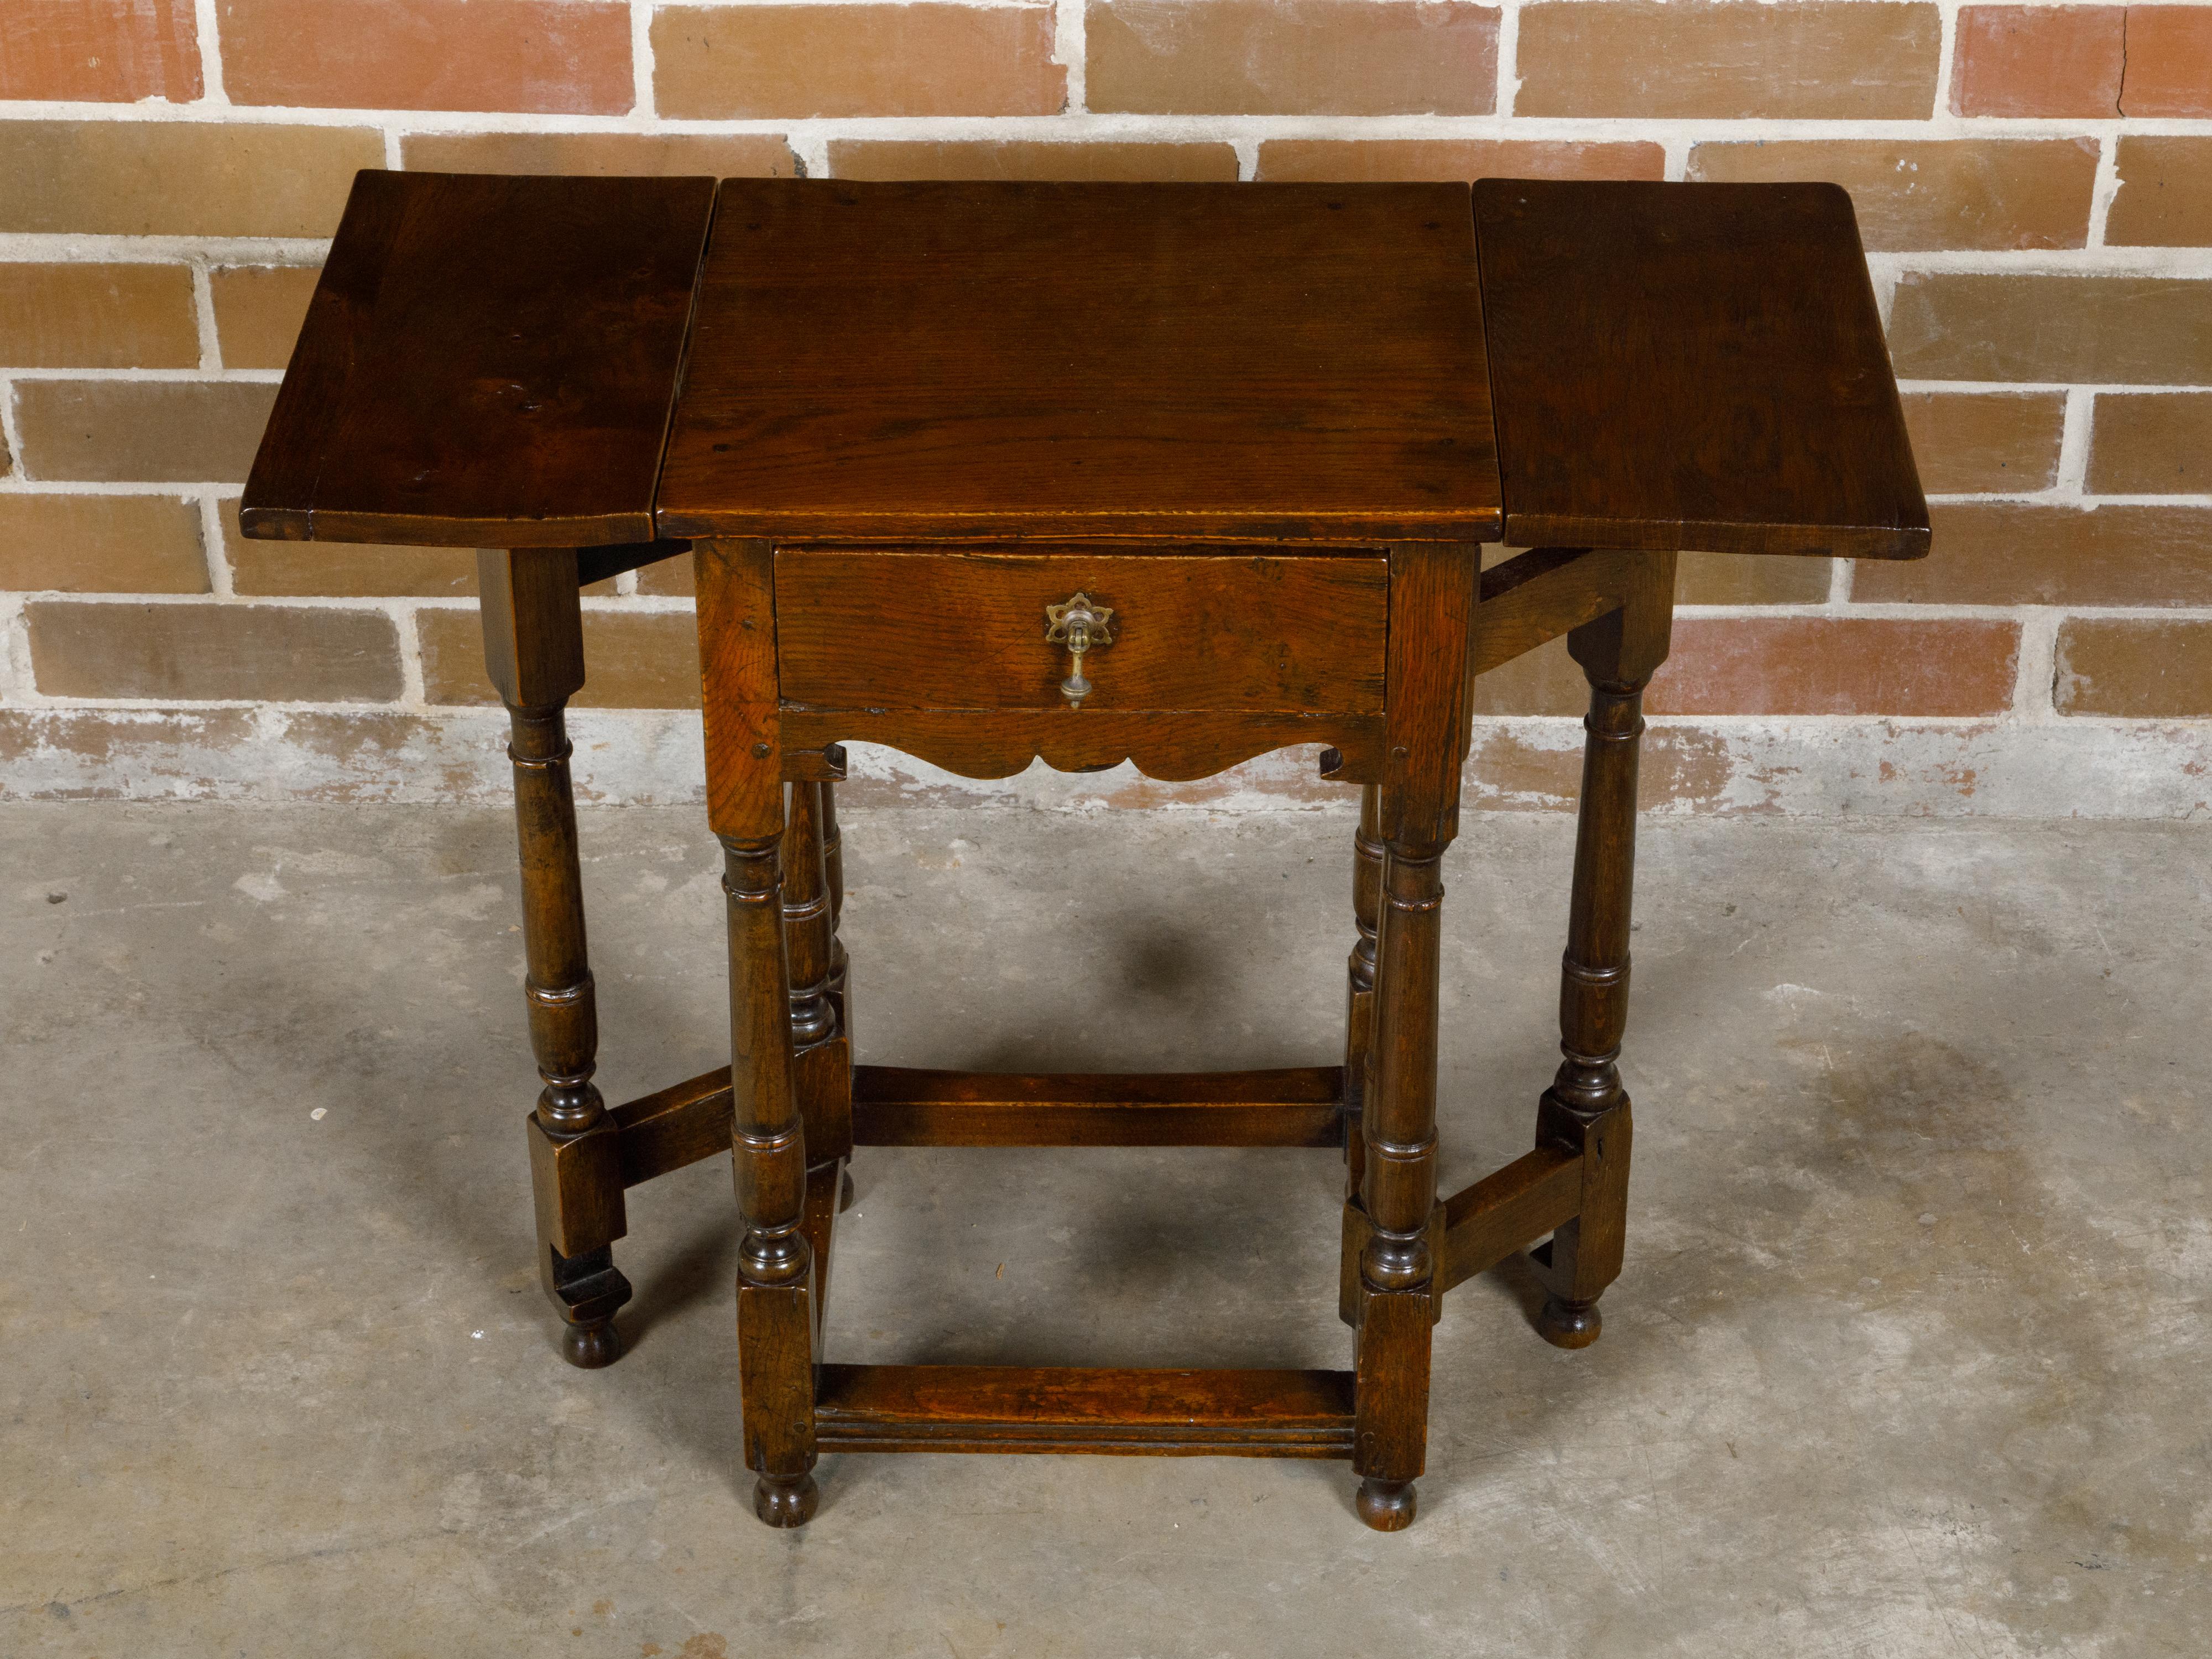 English 19th Century Oak Drop Leaf Table with Swivel Legs and Single Drawer For Sale 5